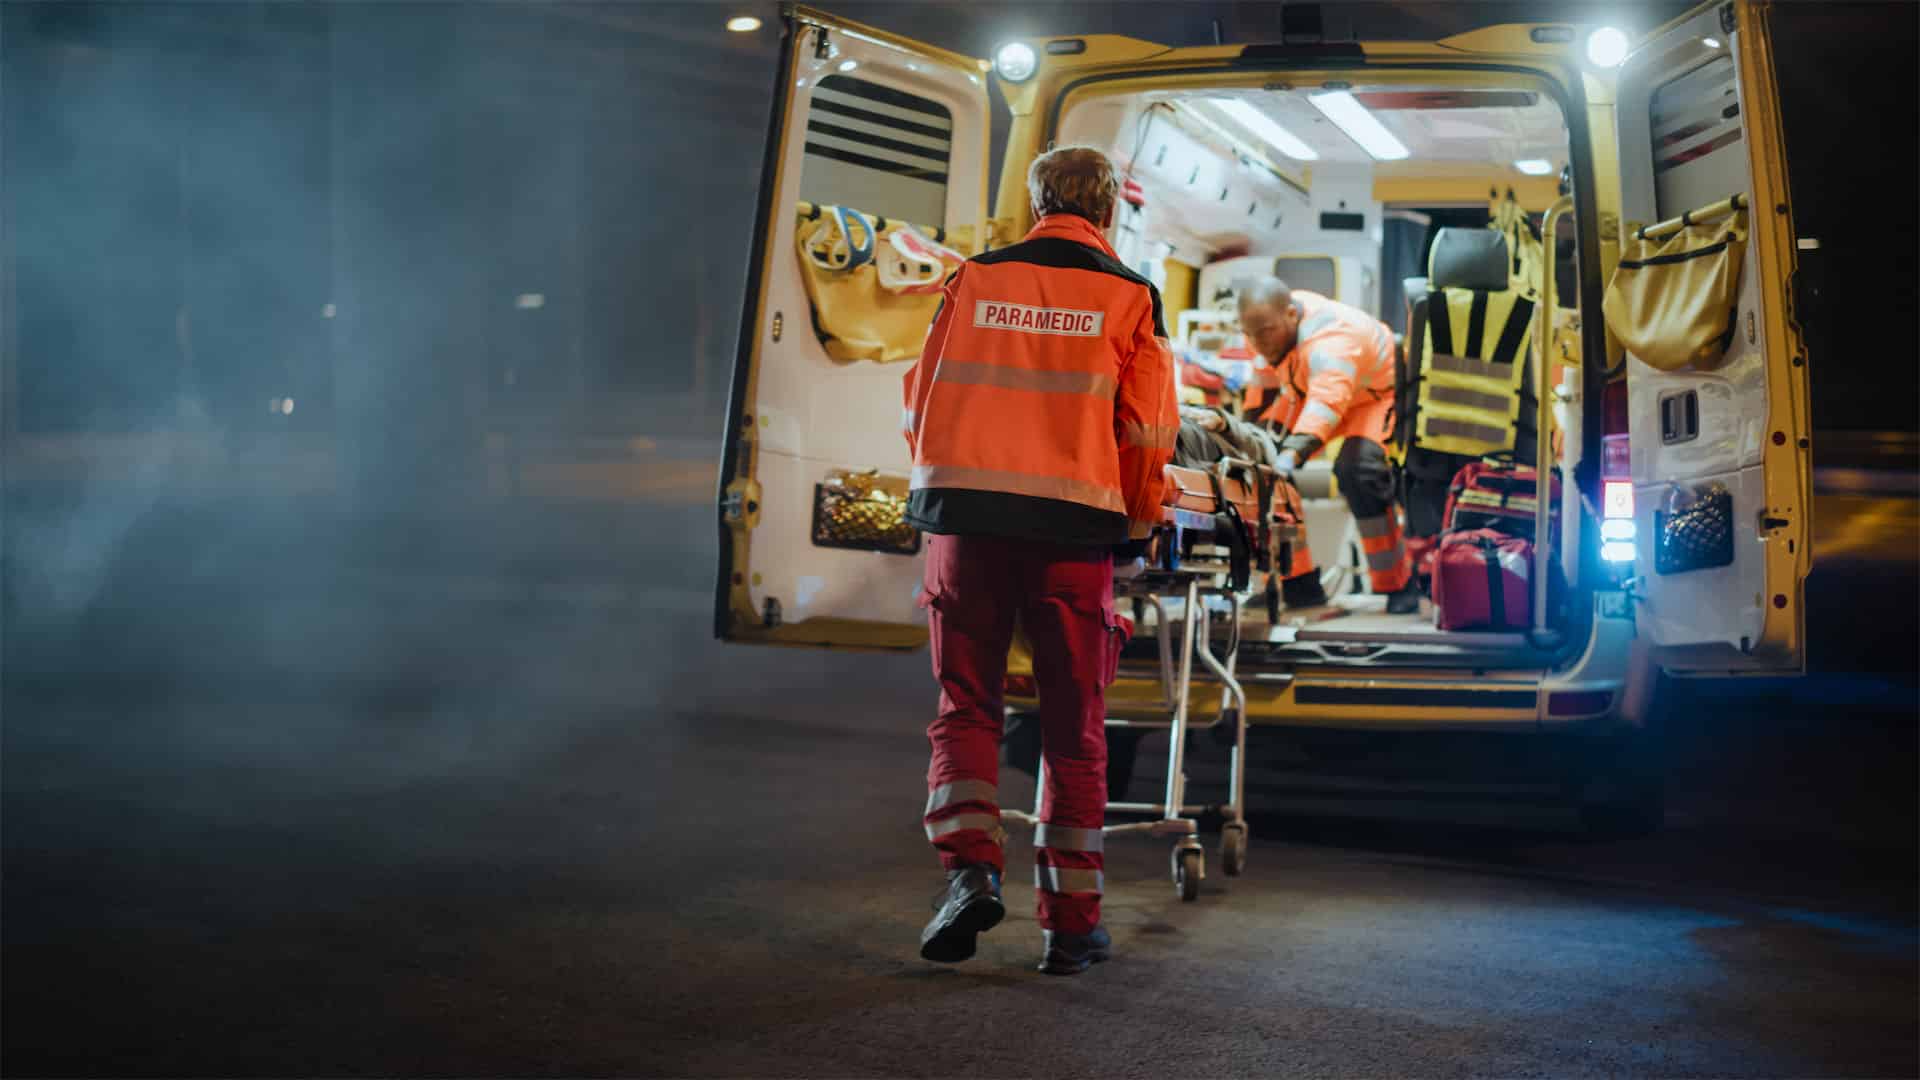 Image Of An Injured Person In Ambulance